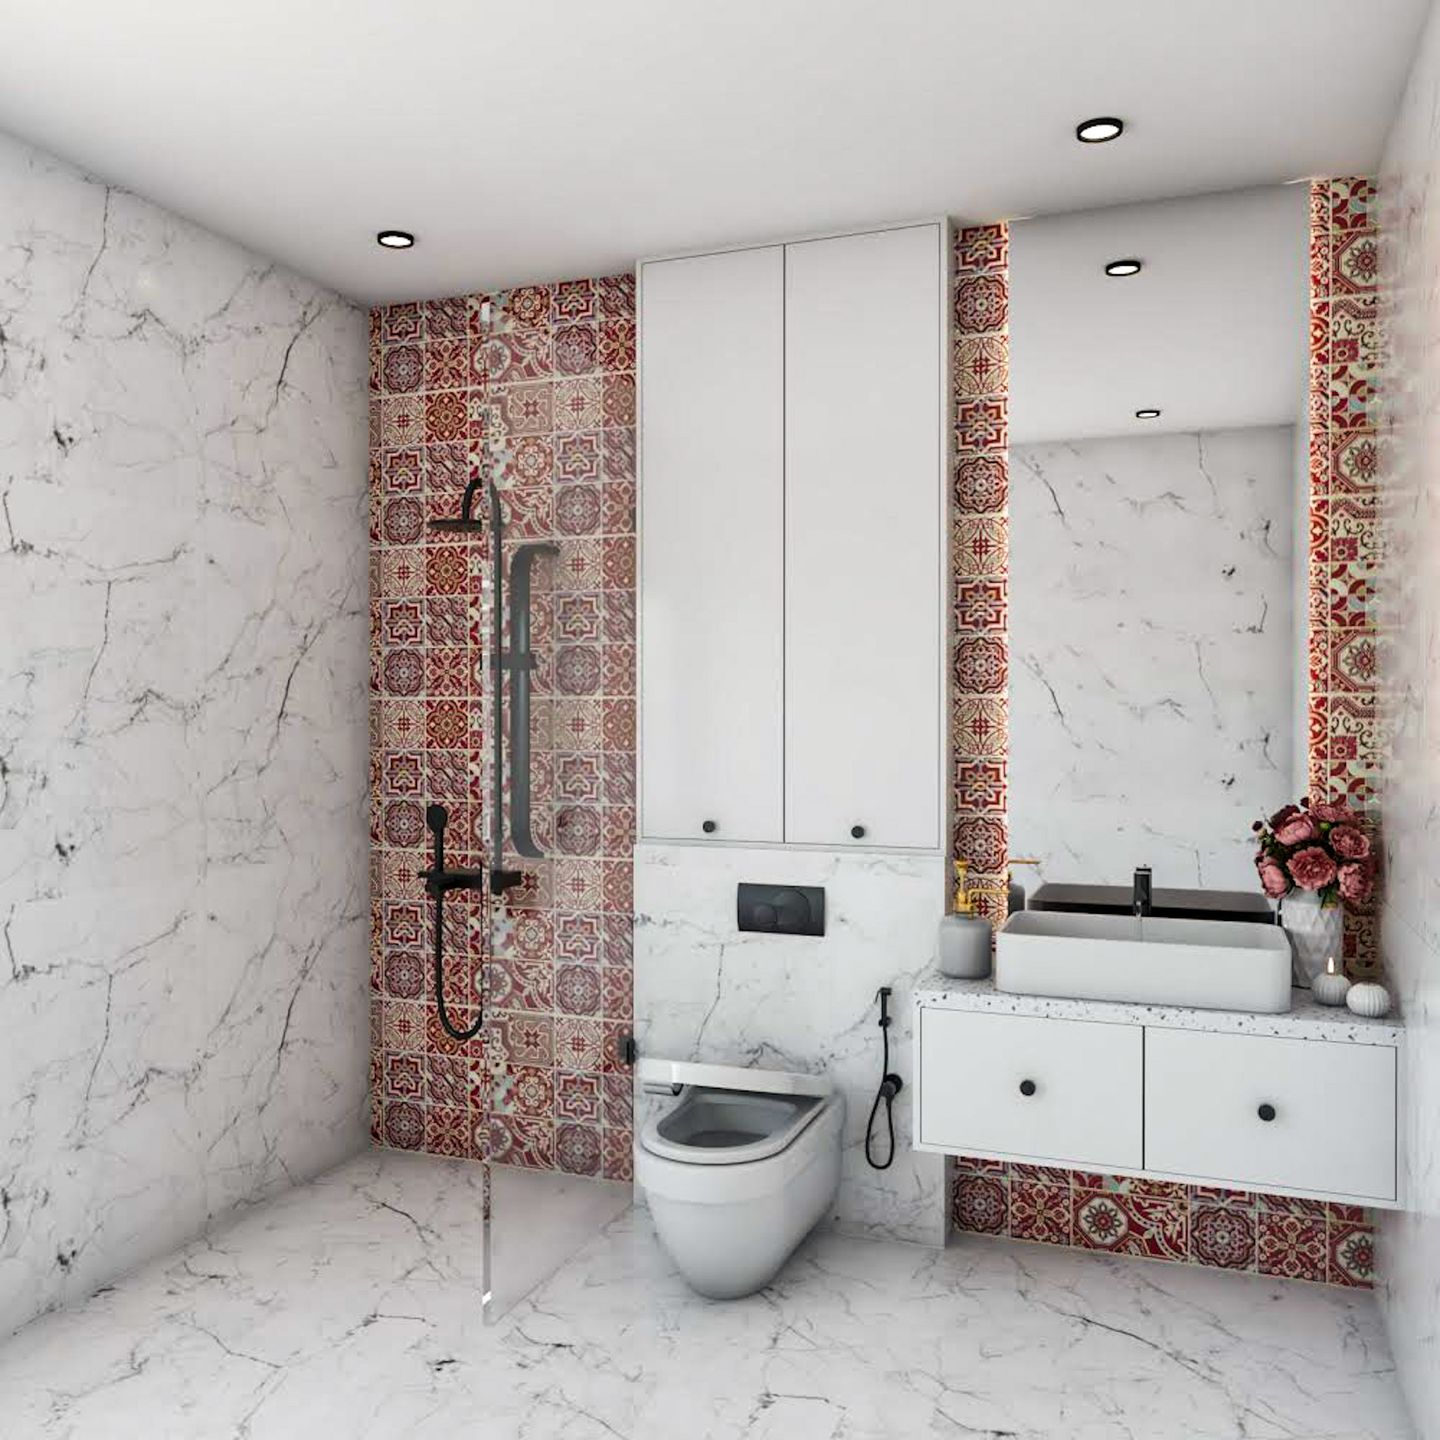 Bathroom Design With Red And White Tiles - Livspace